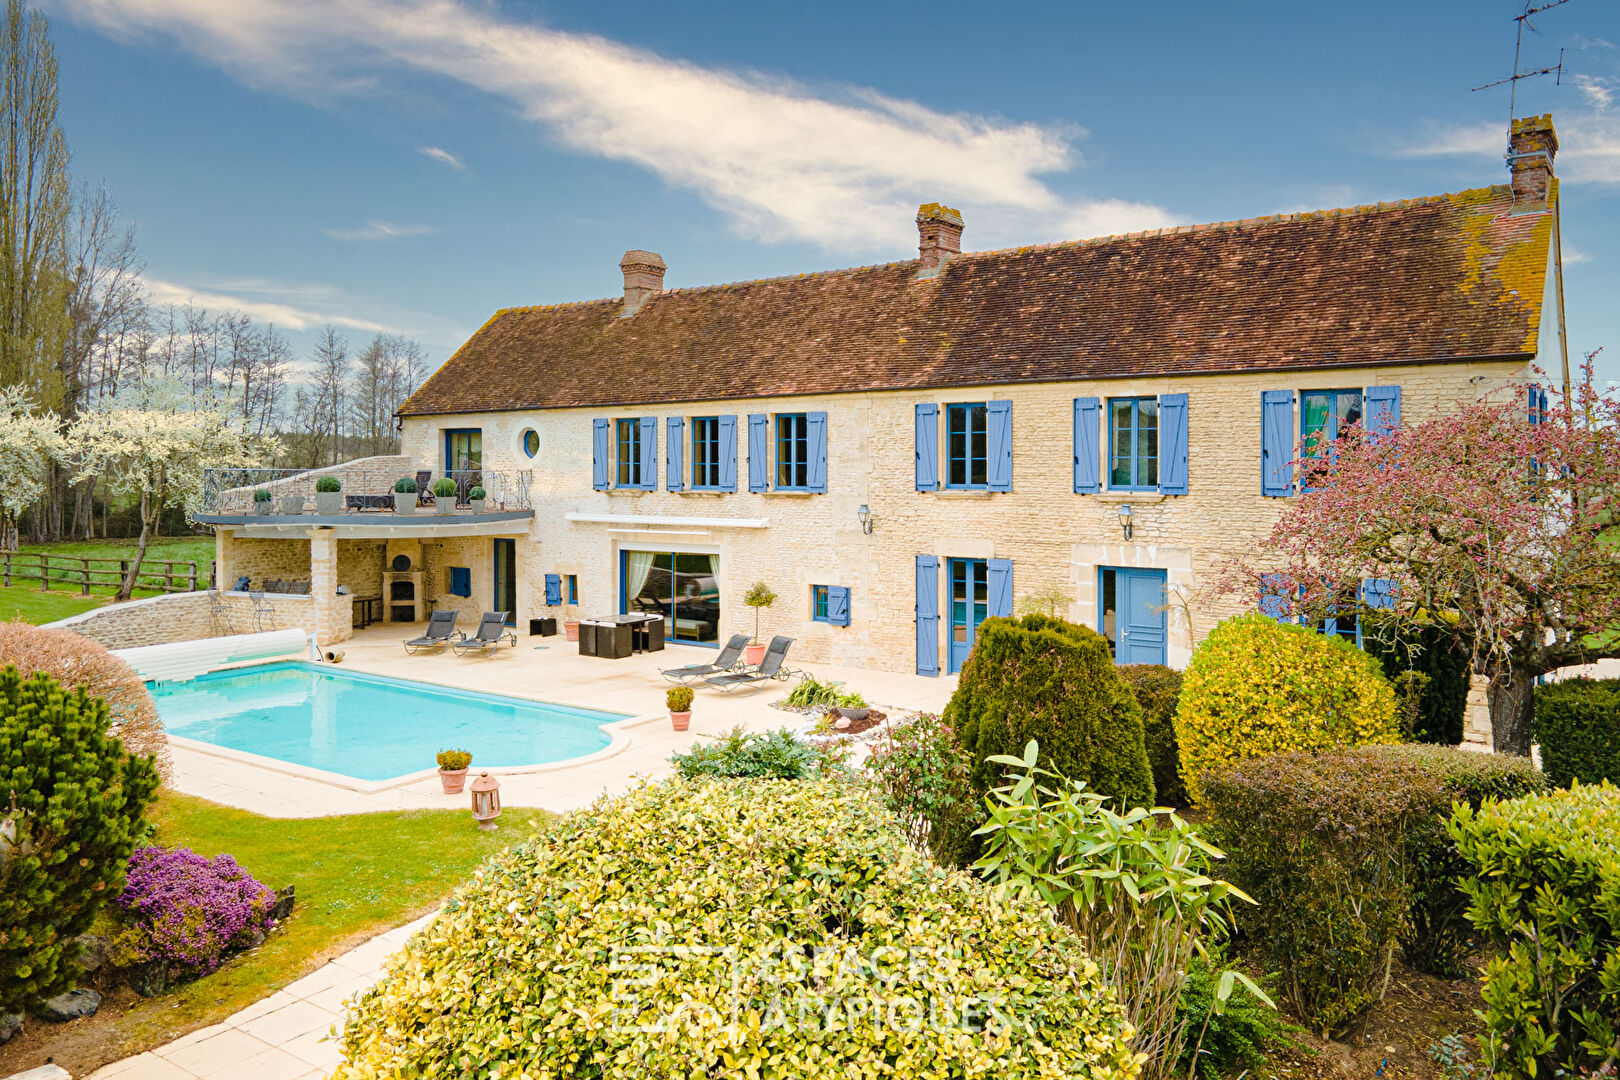 Beautiful domain of 5 hectares in the middle of the Normandy countryside